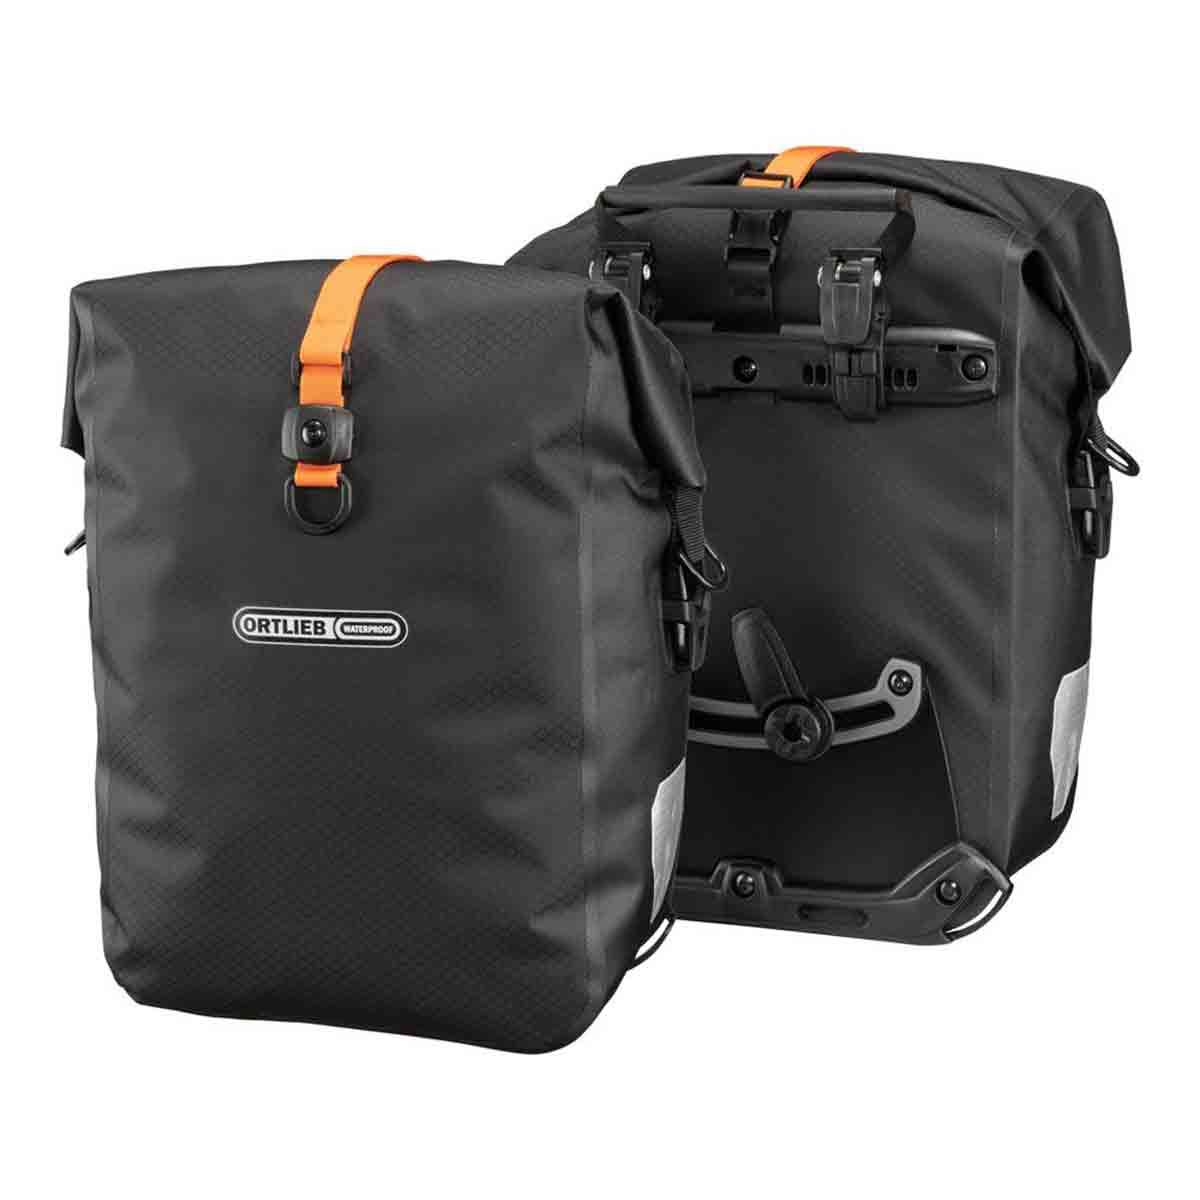 Ortlieb Gravel-Pack front and rear bicycle bags